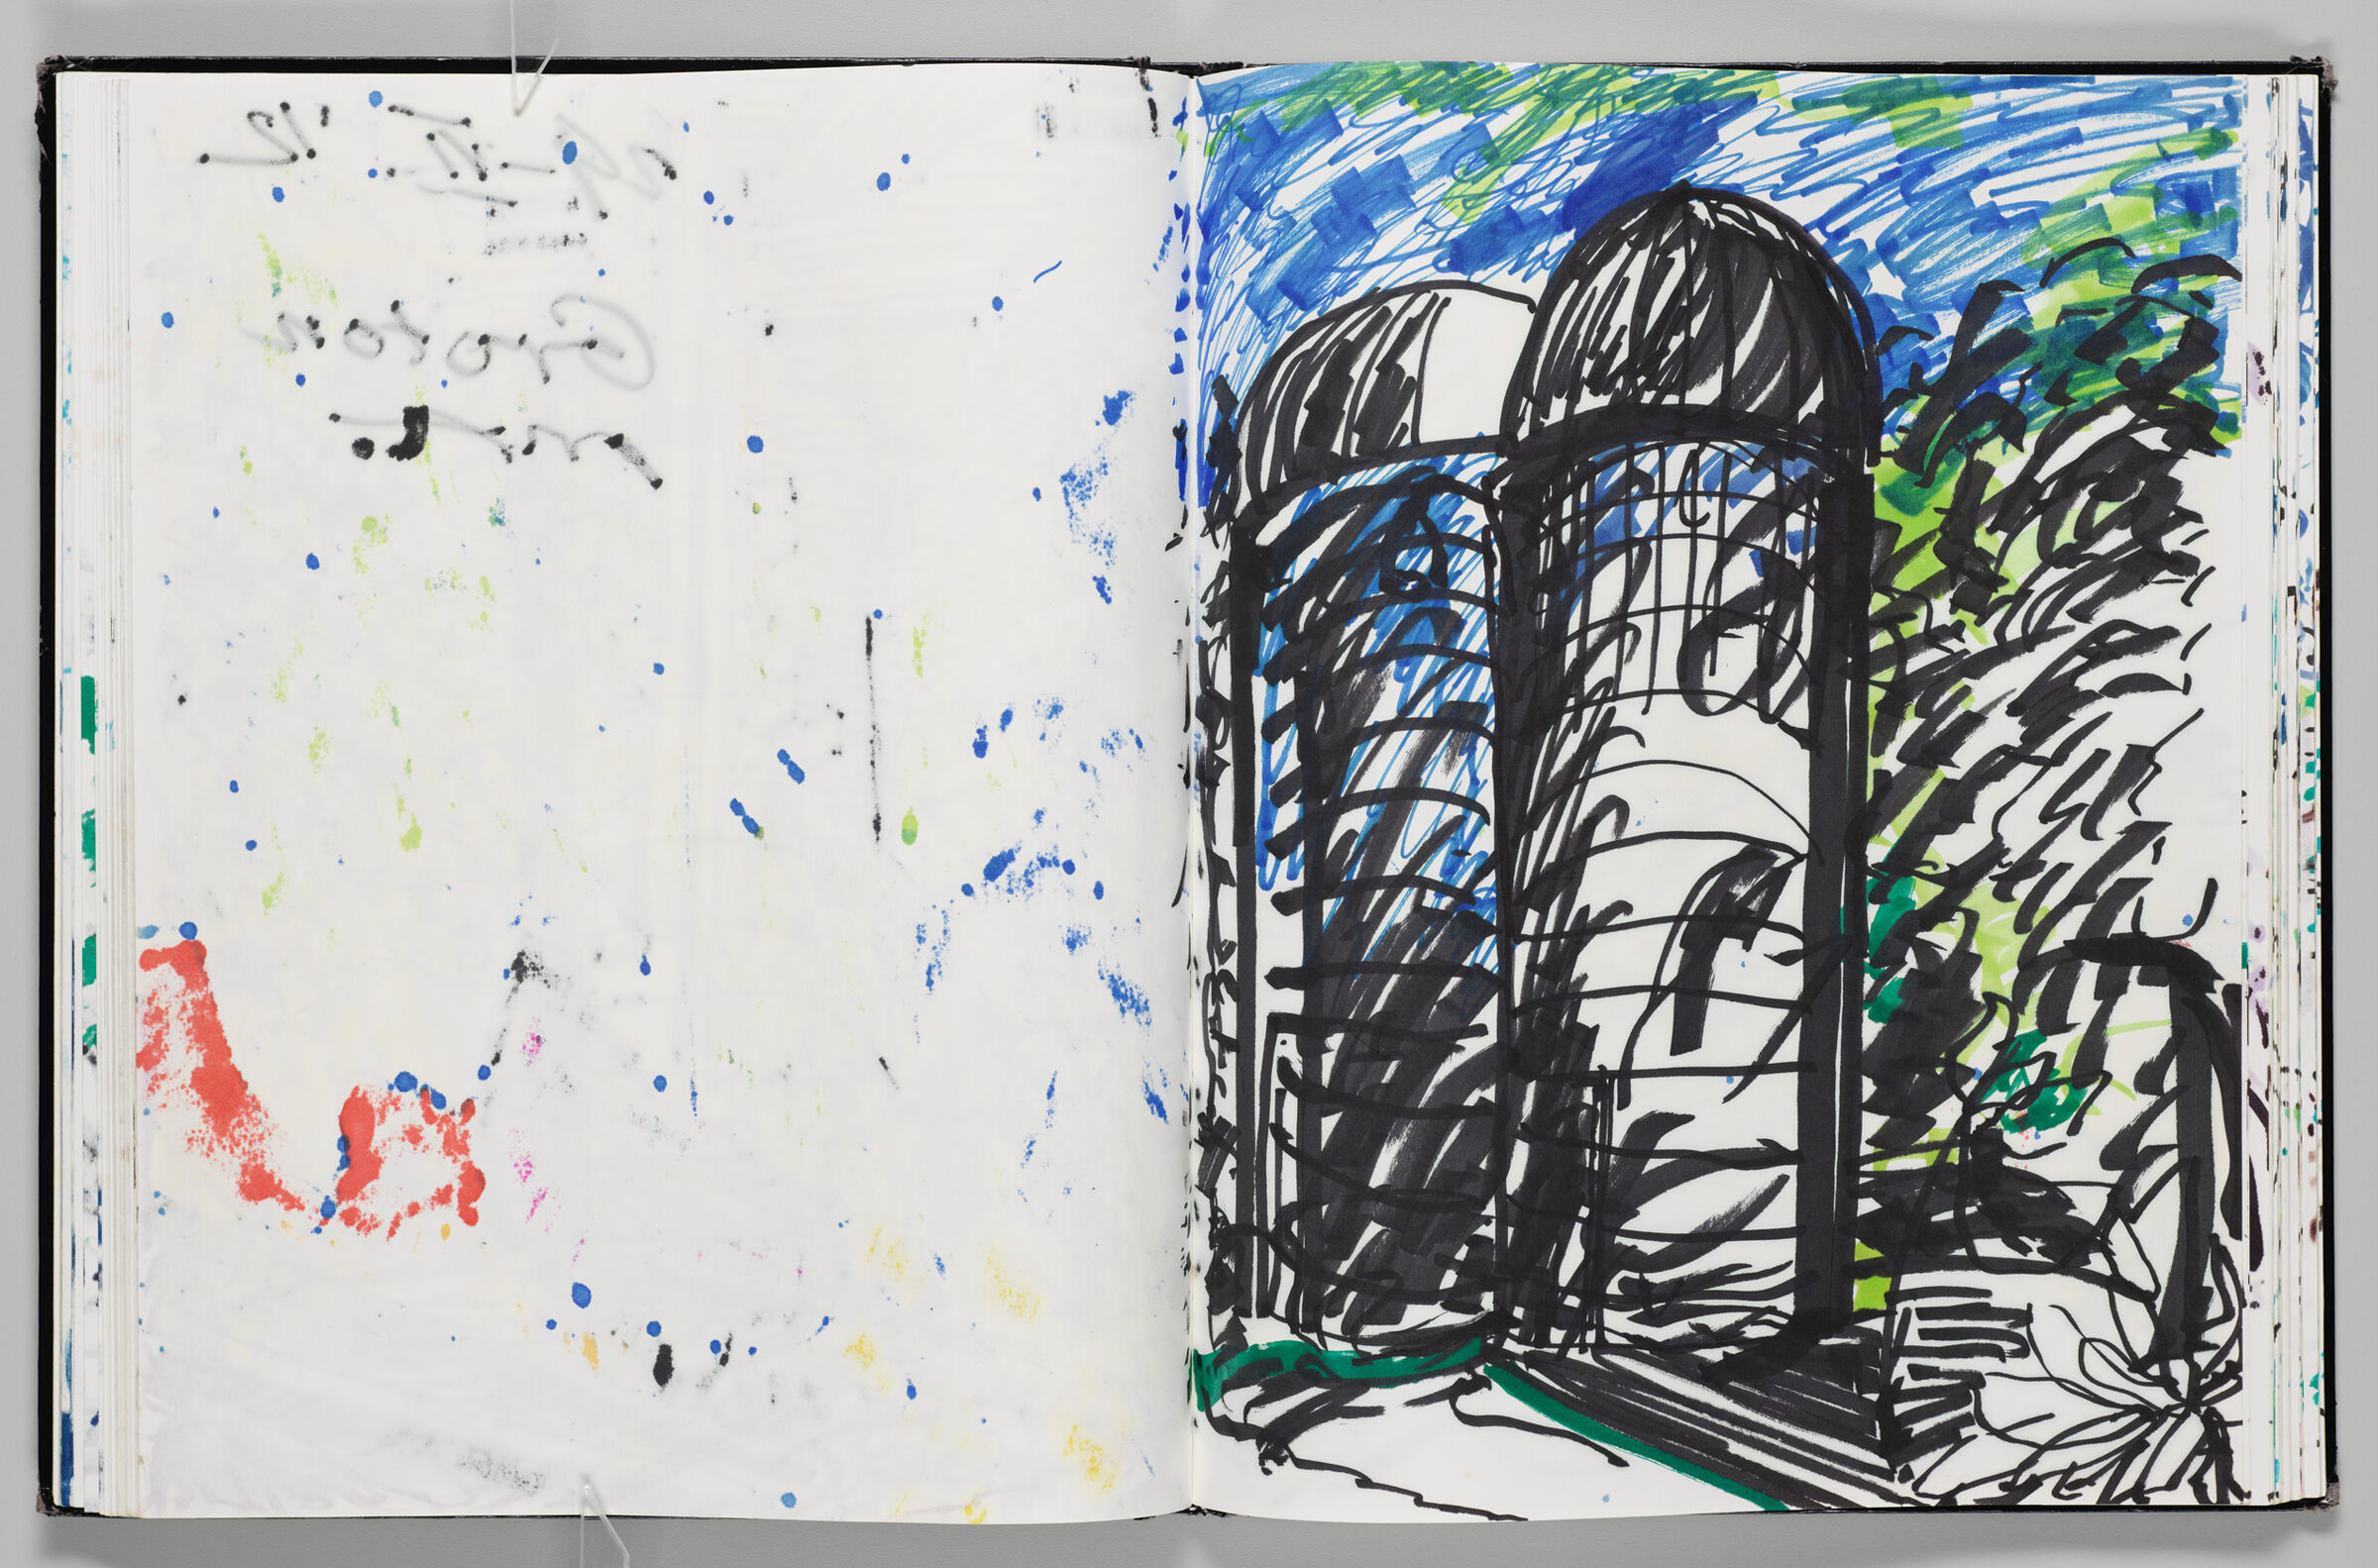 Untitled (Bleed-Through Of Previous Pages, Left Page); Untitled (Silos At Groton, Ma, Home, Right Page)